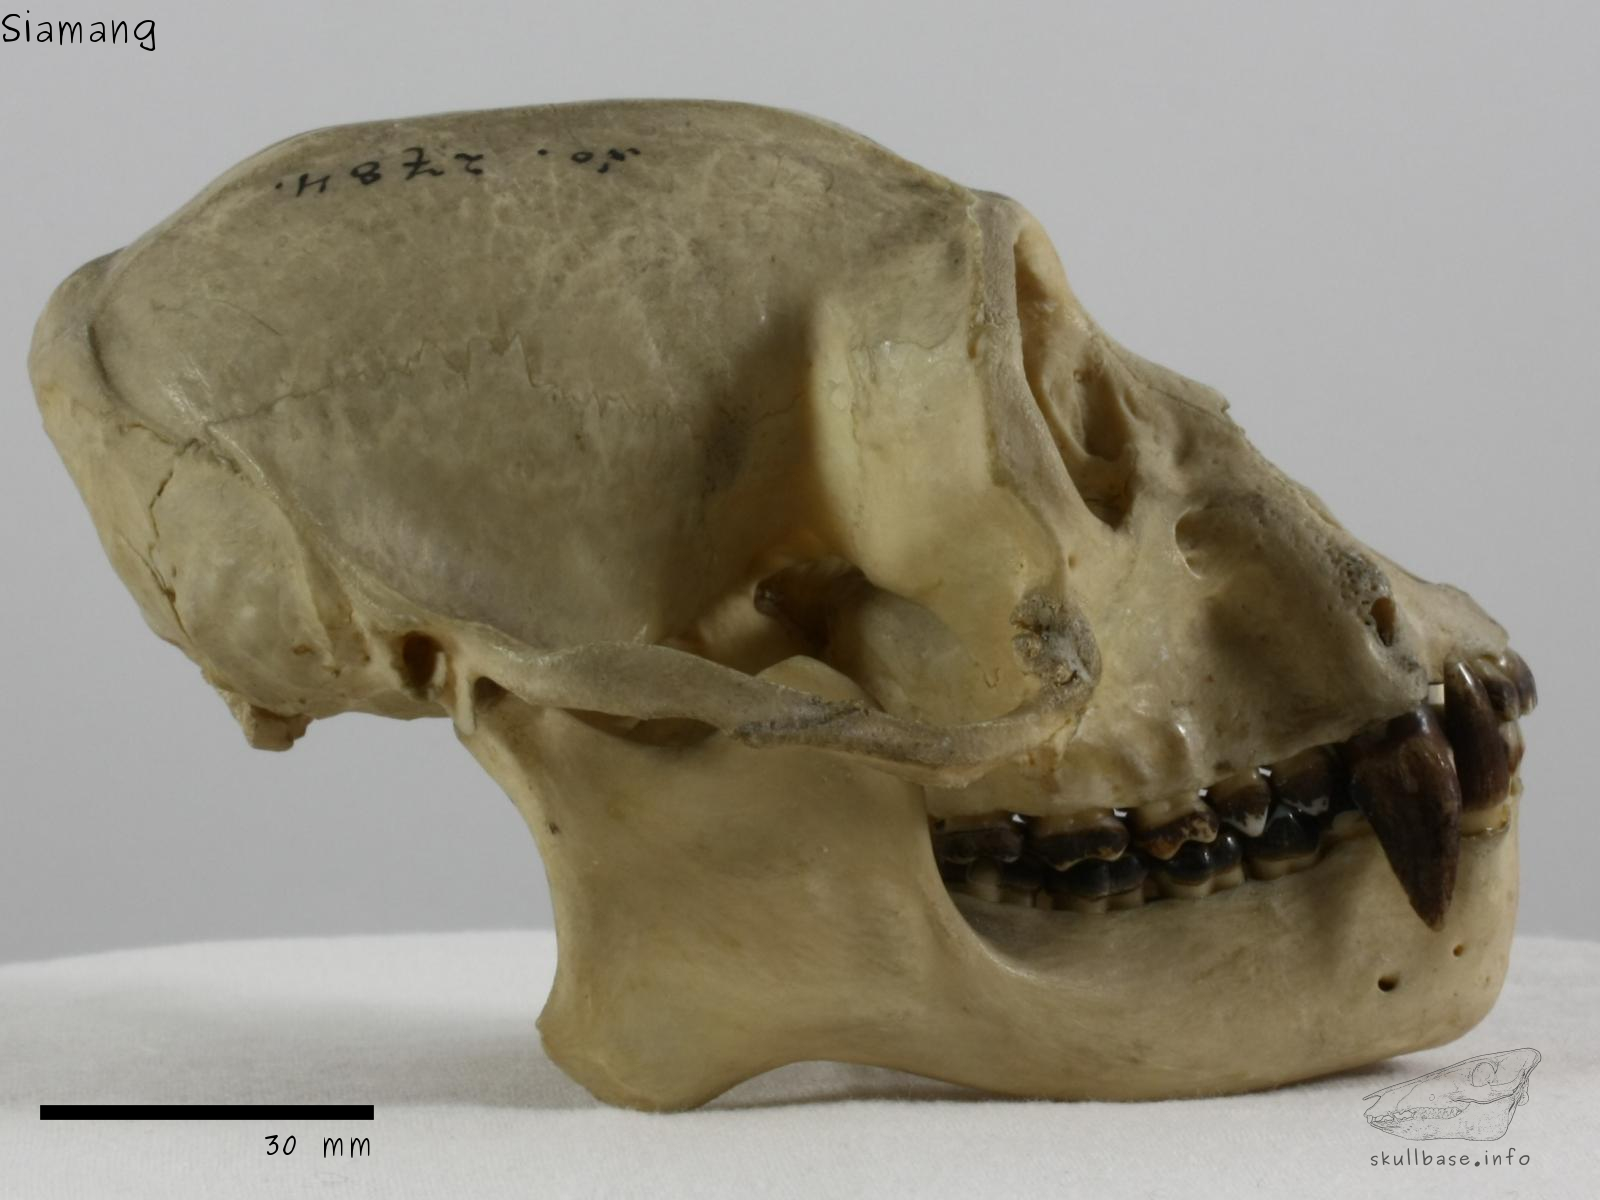 Siamang (Symphalangus syndactylus) skull lateral view